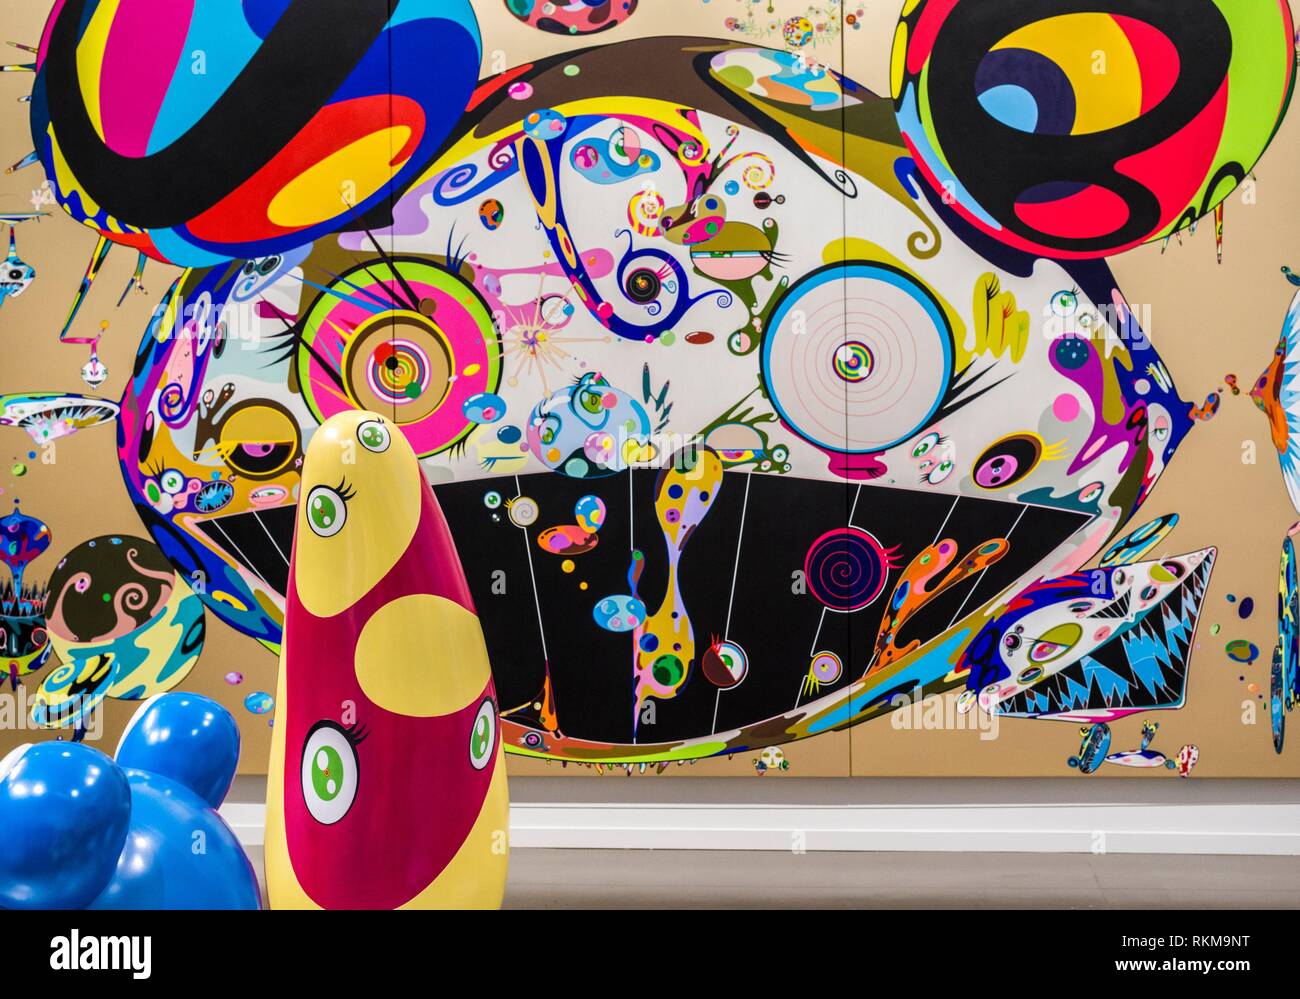 Exhibition, ""The Octopus Eats its Own Leg"" by artist Takashi Murakami